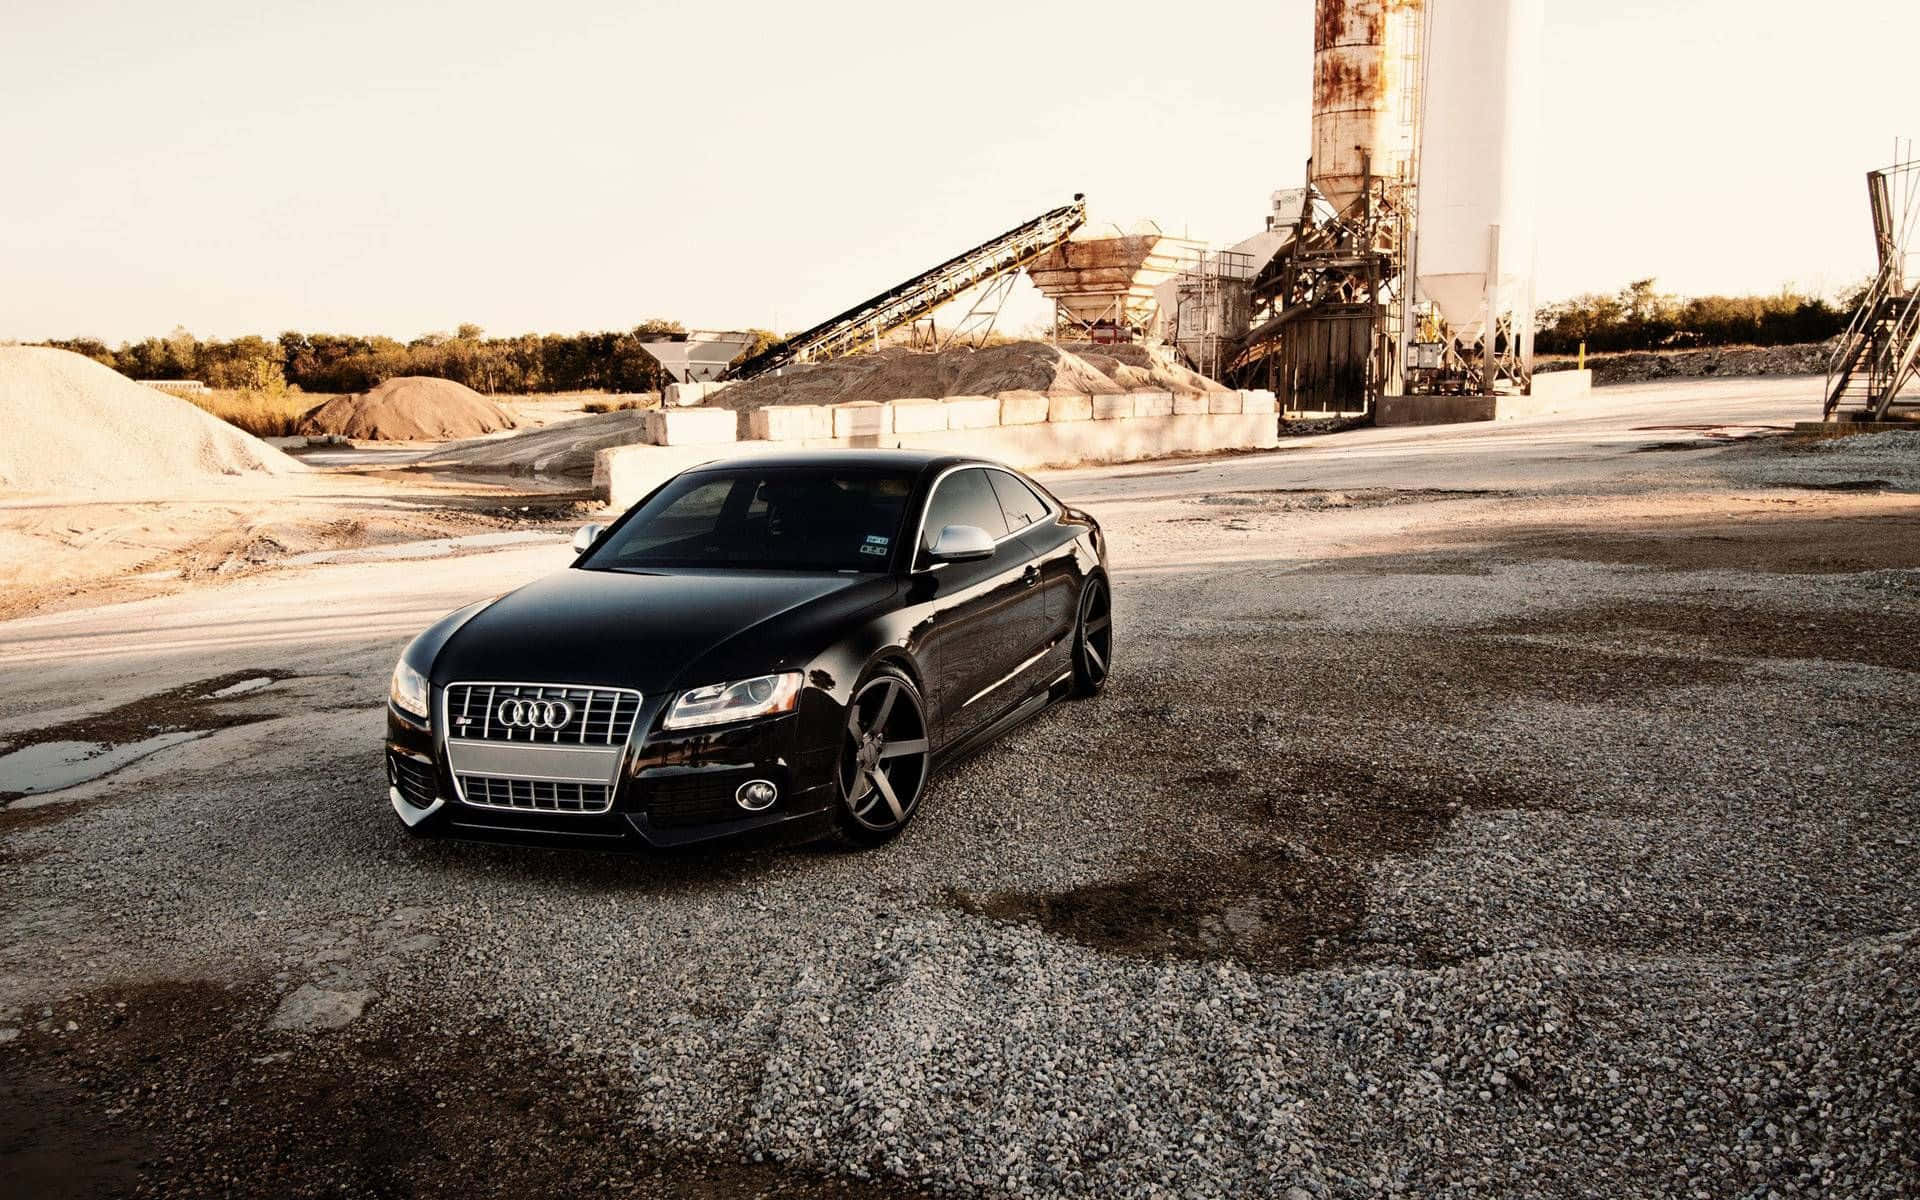 Speed Meets Style: Audi S5 on the Road Wallpaper